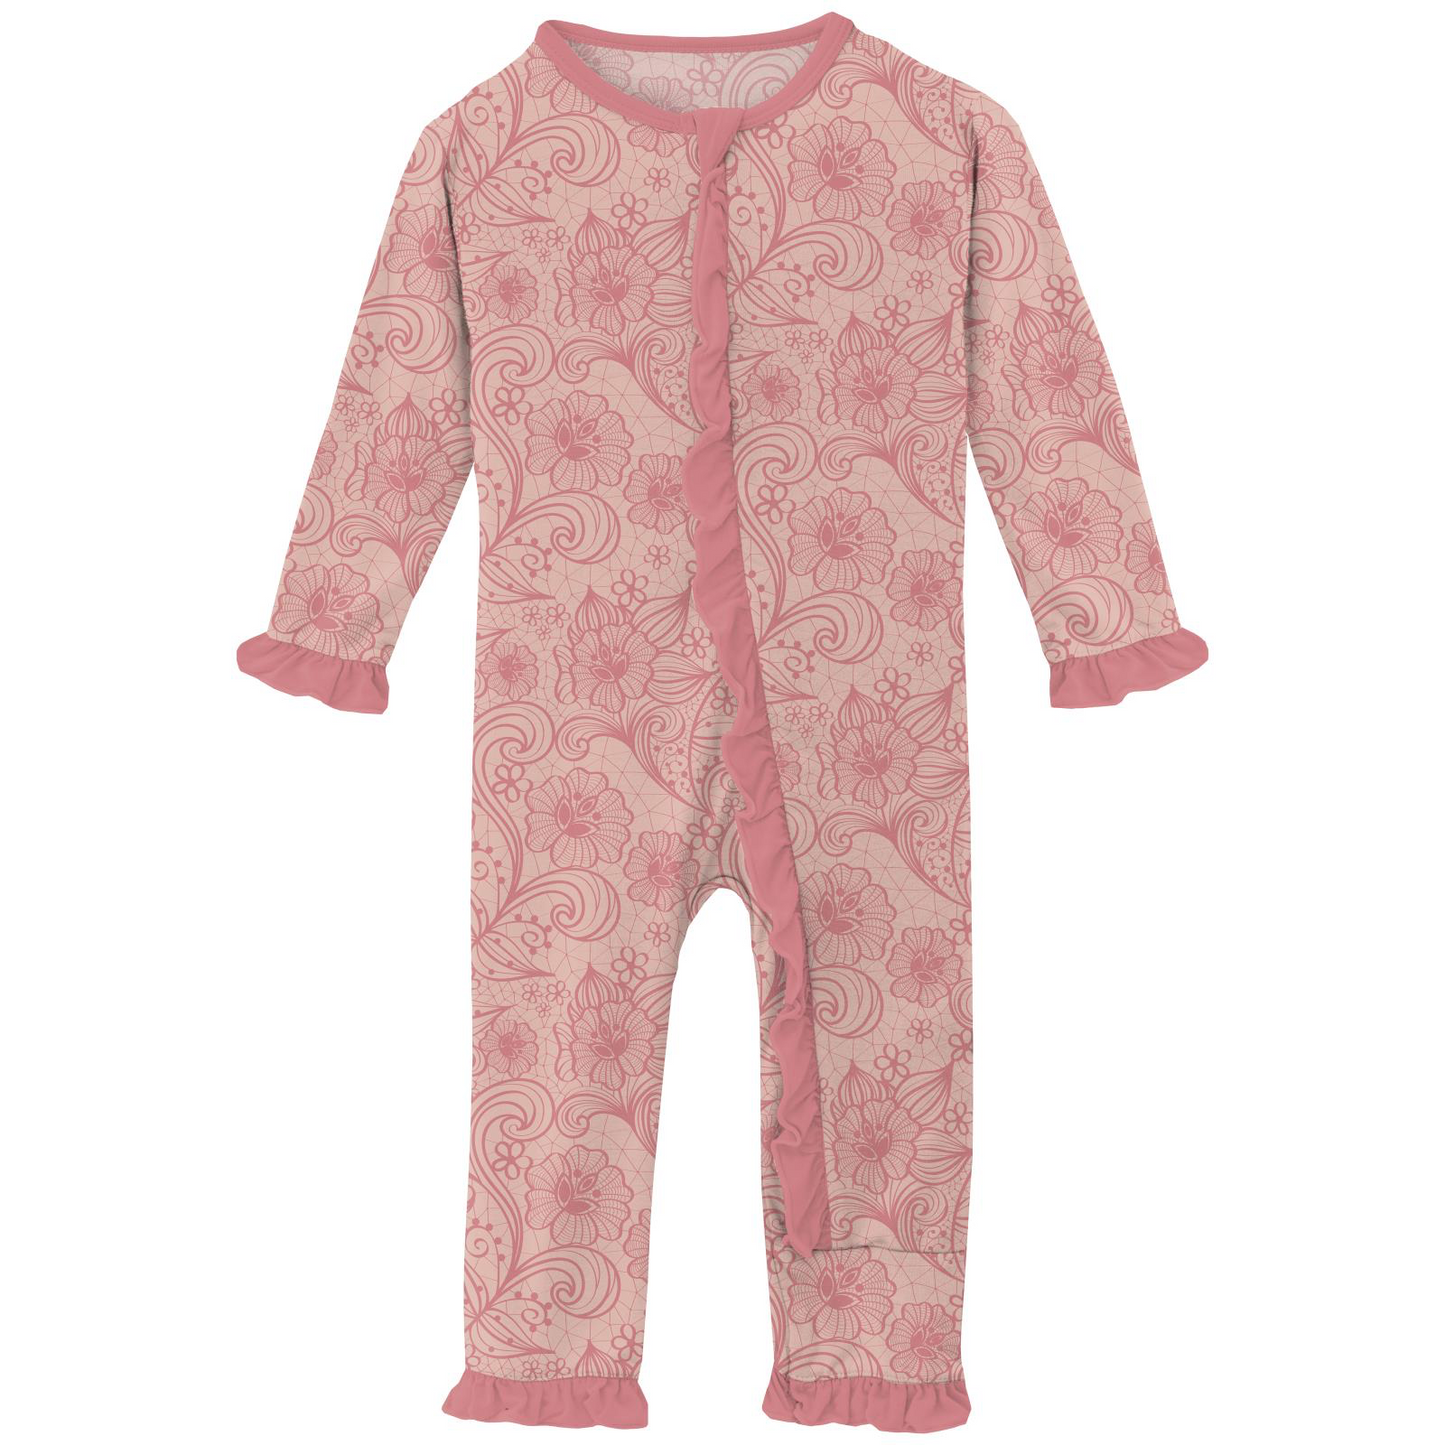 Peach Blossom Lace Ruffle Print Coverall with Zipper